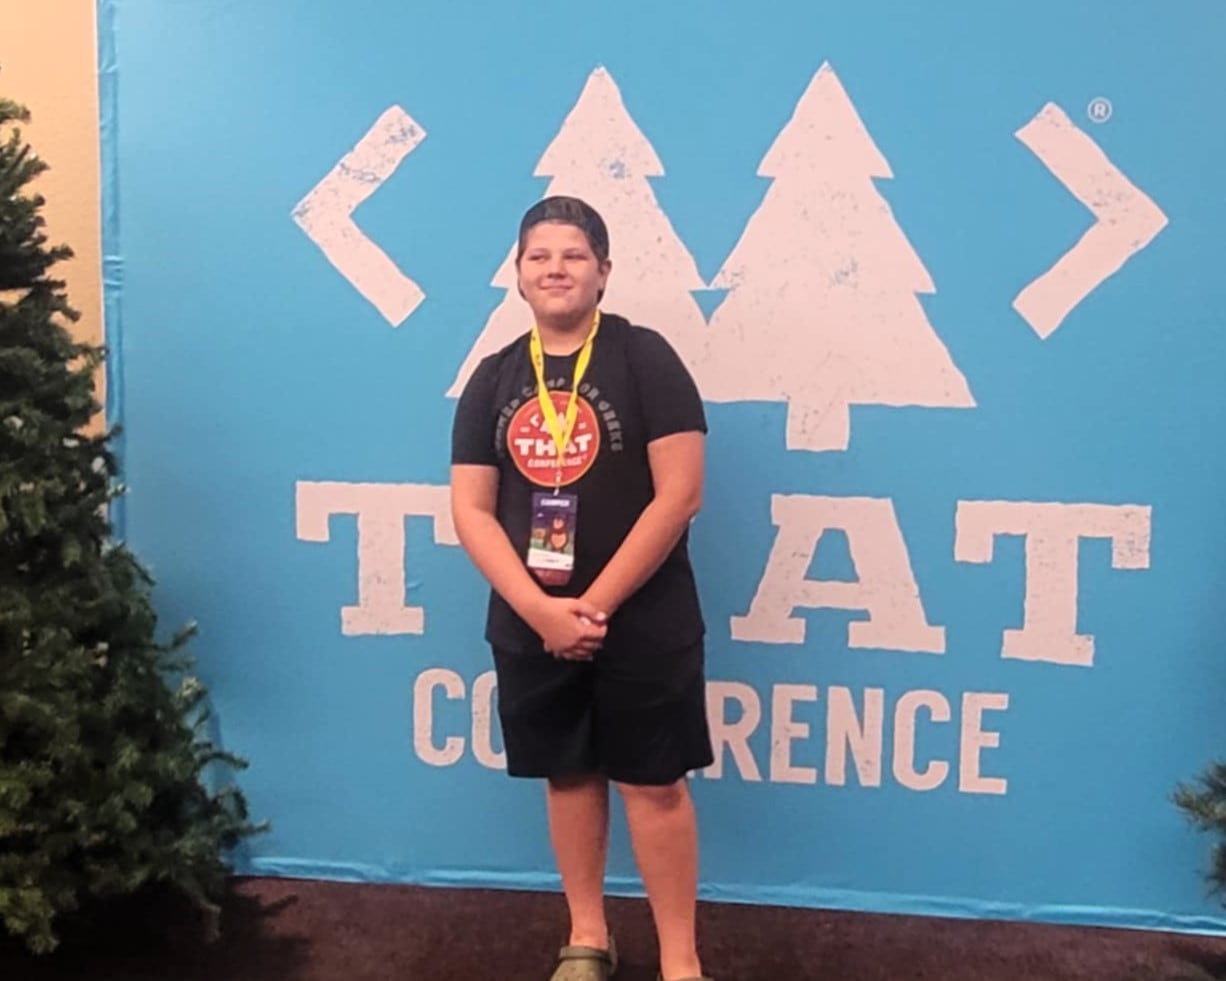 Connor Freeman, 11, of Joliet, will present at THAT Conference, which will run July 29 to Aug. 1 in Wisconsin. It's the second year in a row that Connor will present to an audience of 50 to 100 people of all ages.